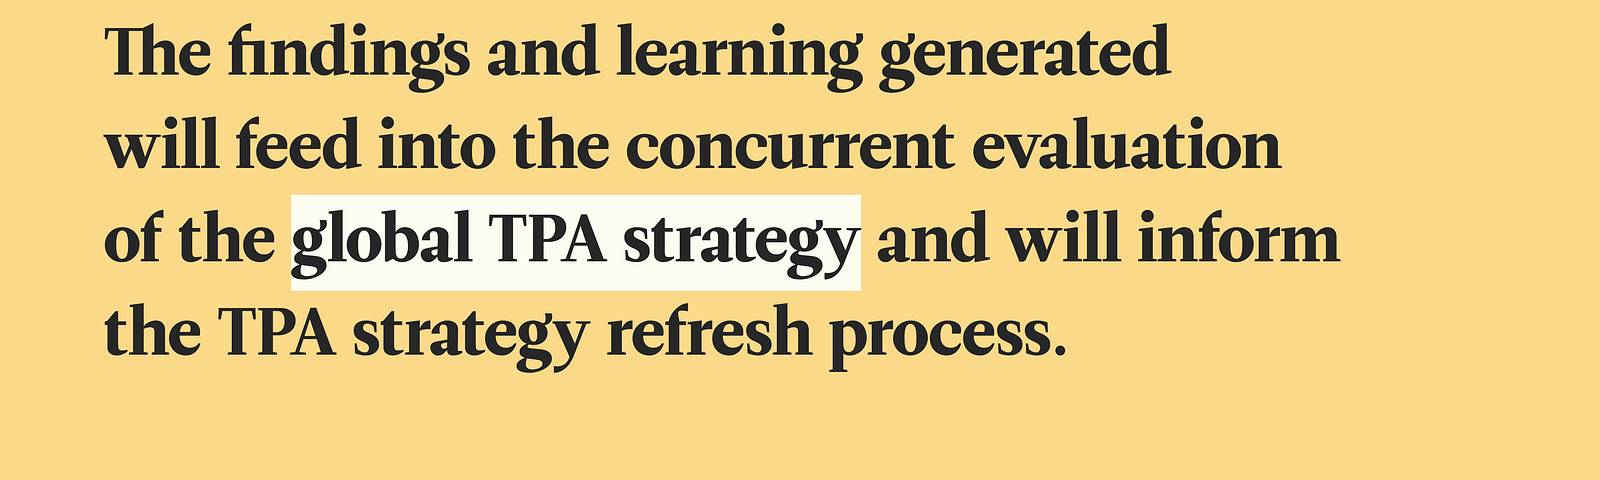 The findings and learning generated will feed into the concurrent evaluation of the global TPA strategy and will inform the TPA strategy refresh process